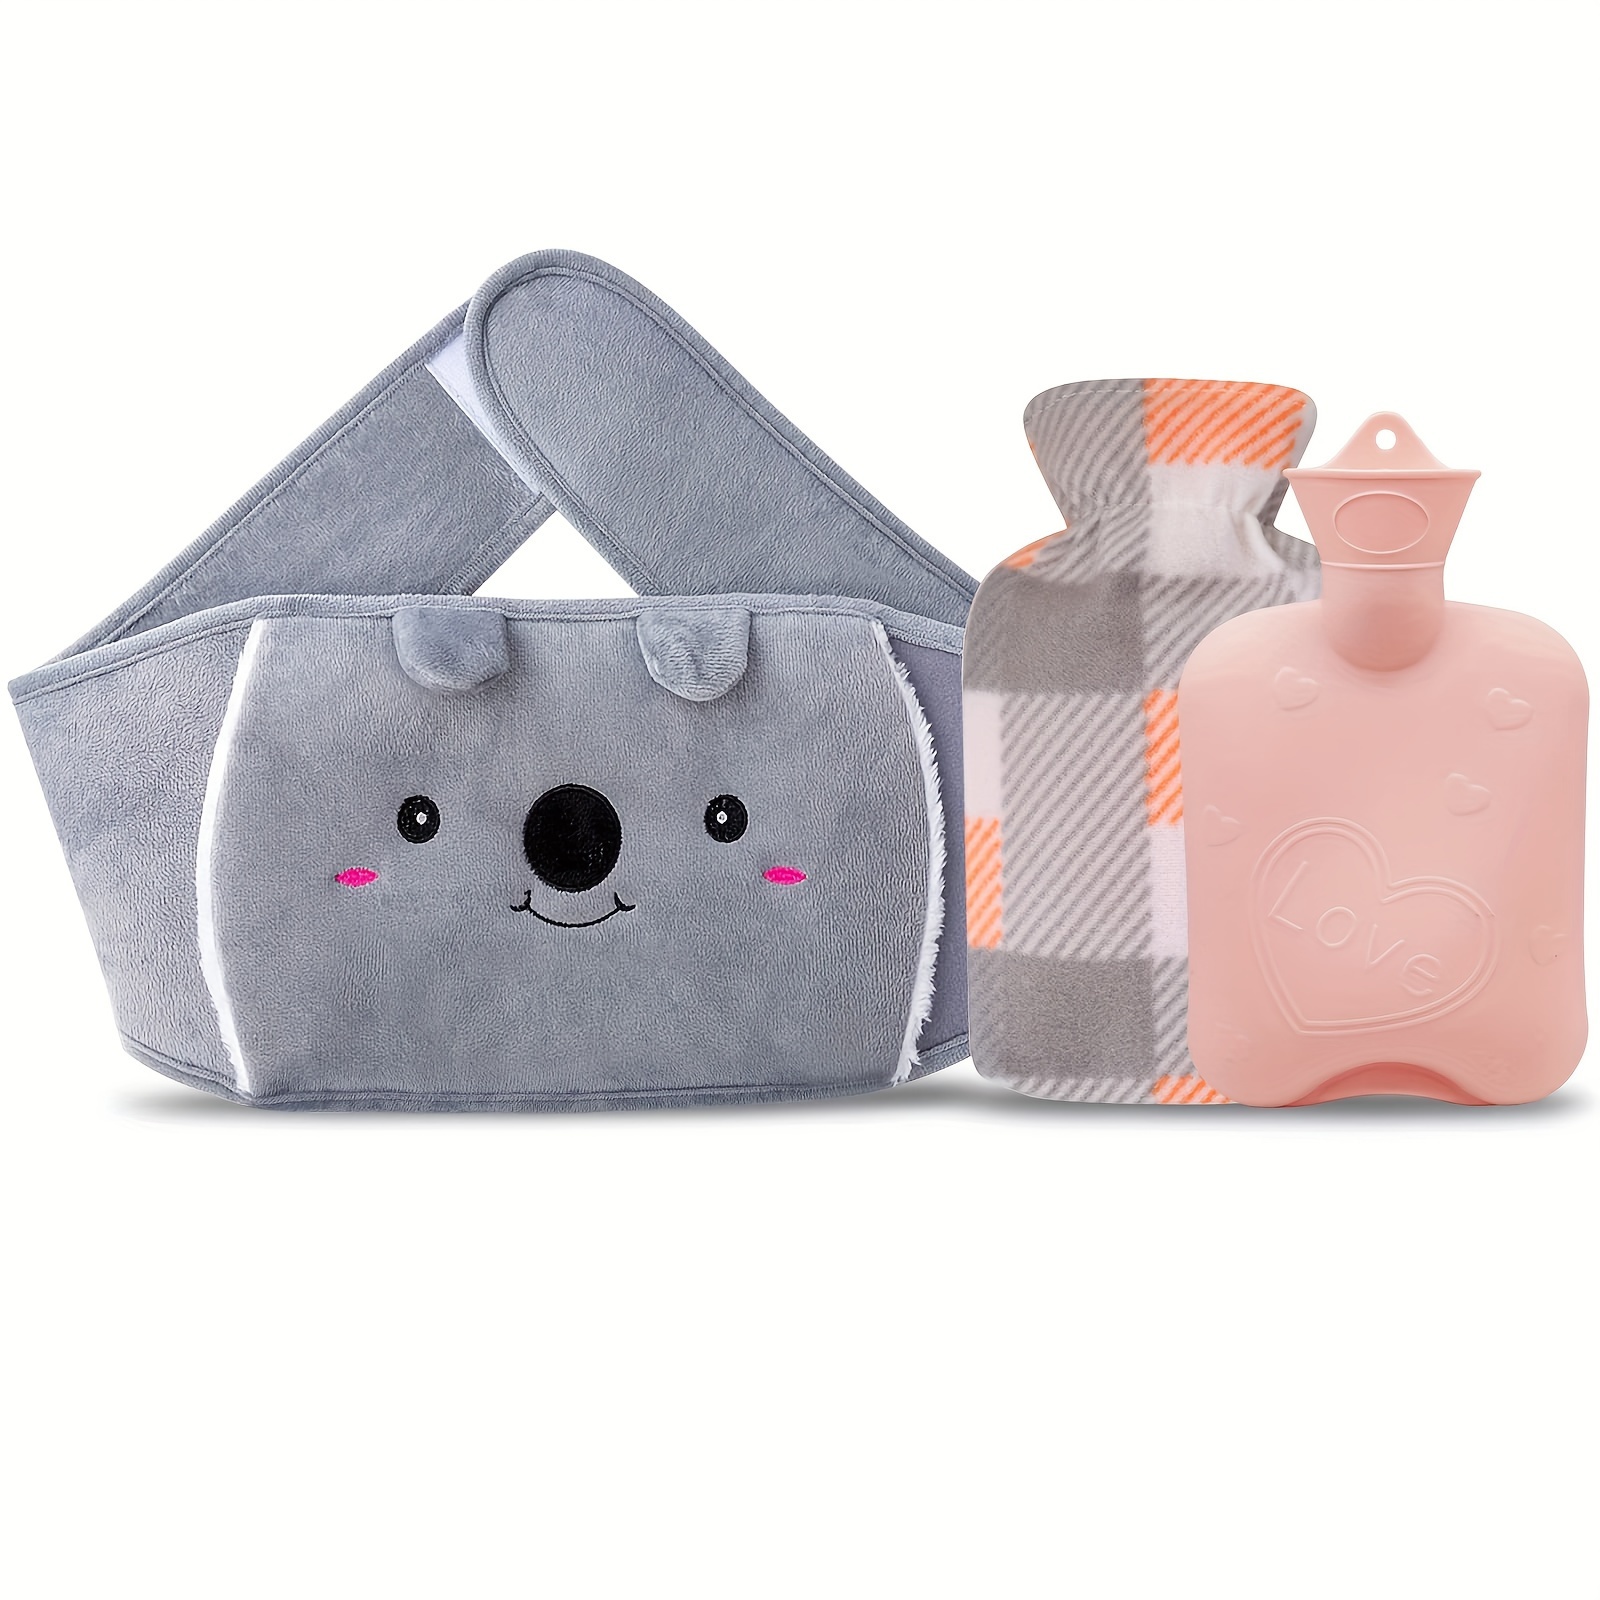 1000ml Hot Water Bottle Injection Type Explosion-proof Plush Warm Handbag  For Kids, Warm Belly And Bedding For Girls, Winter